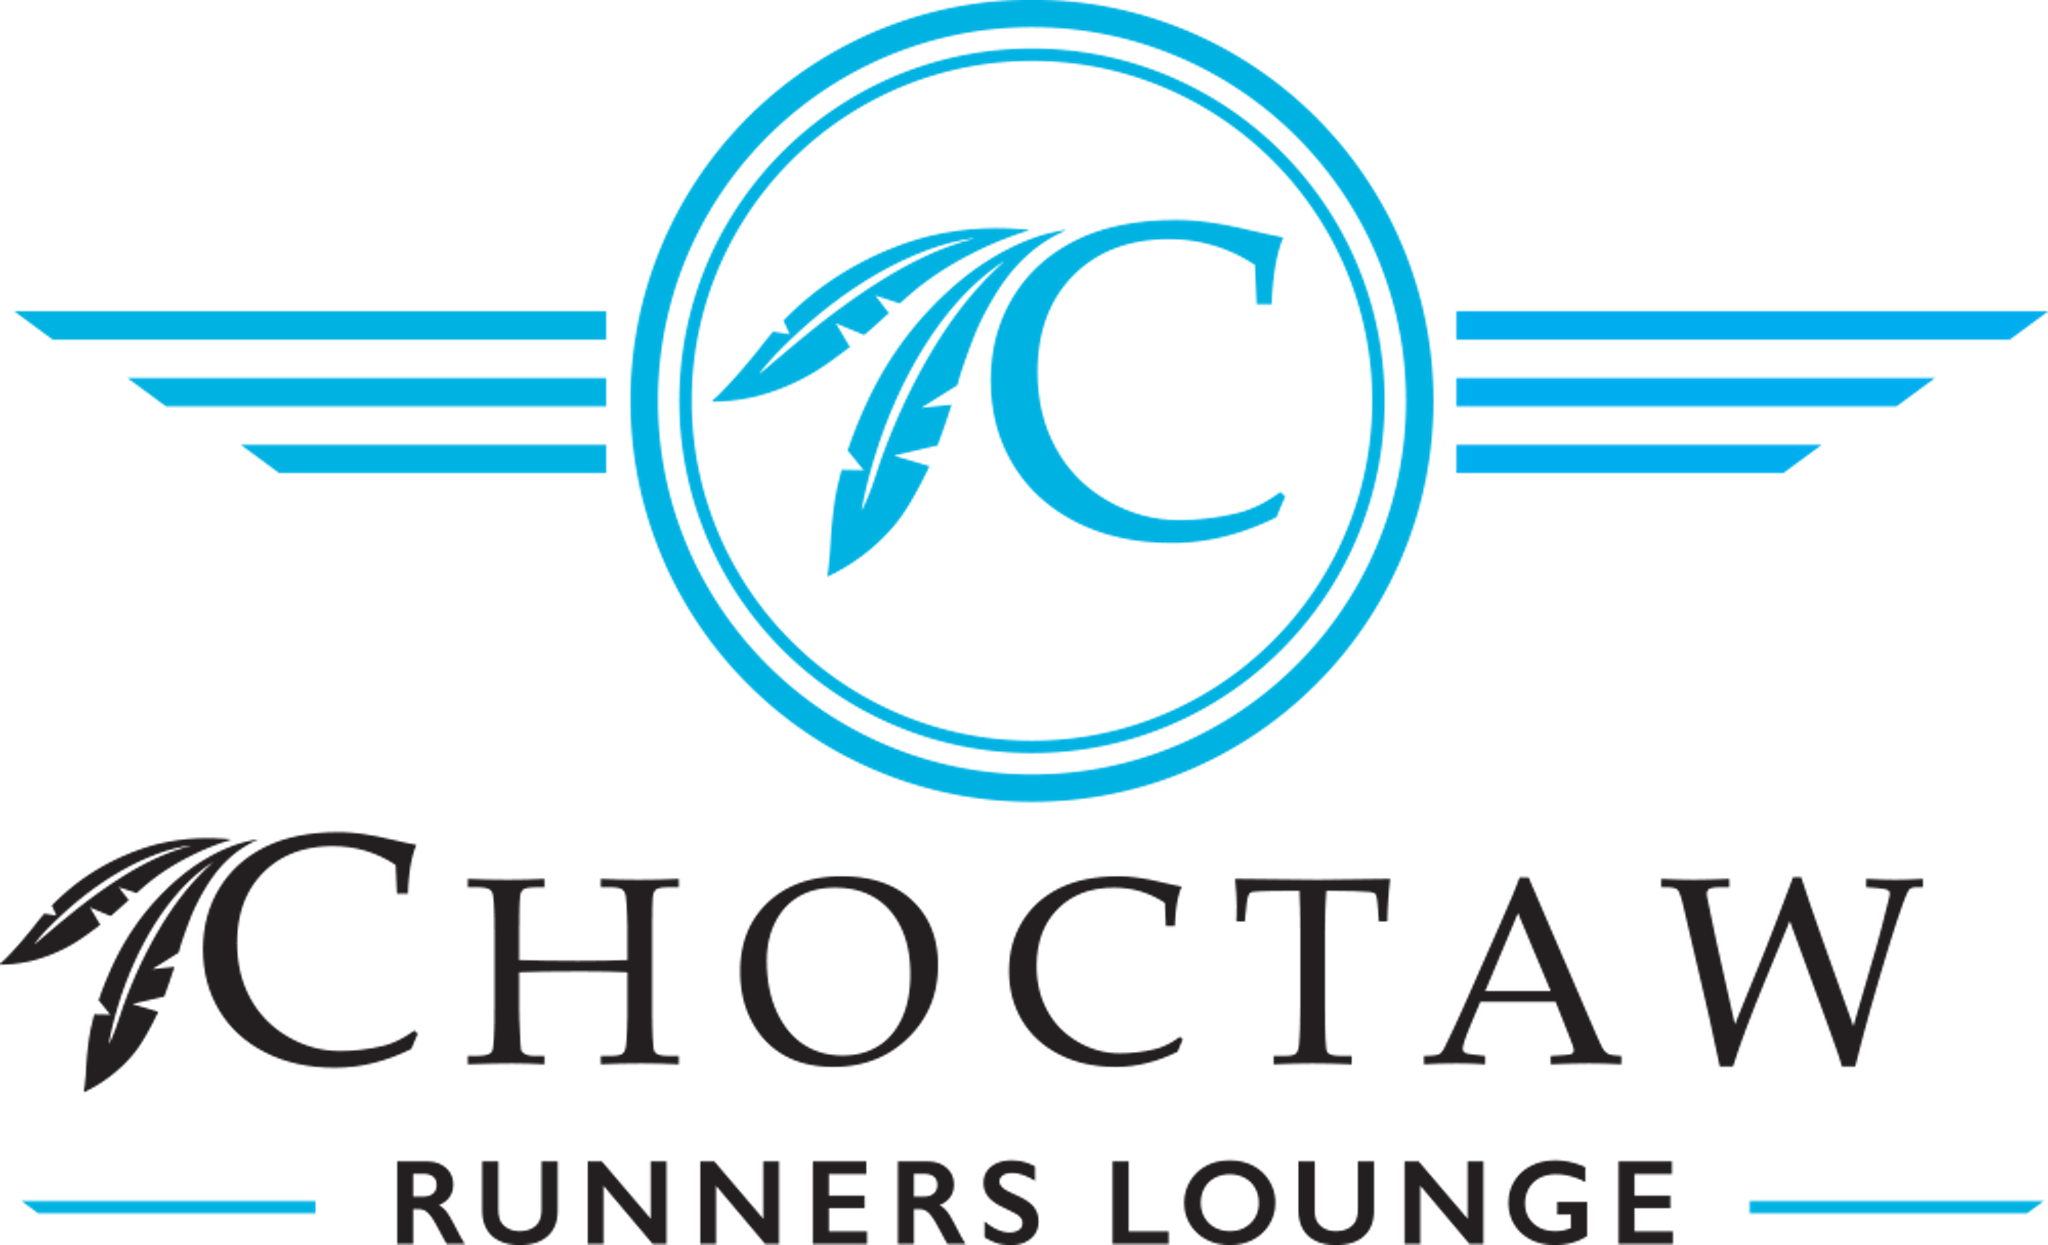 Choctaw Runners Lounge